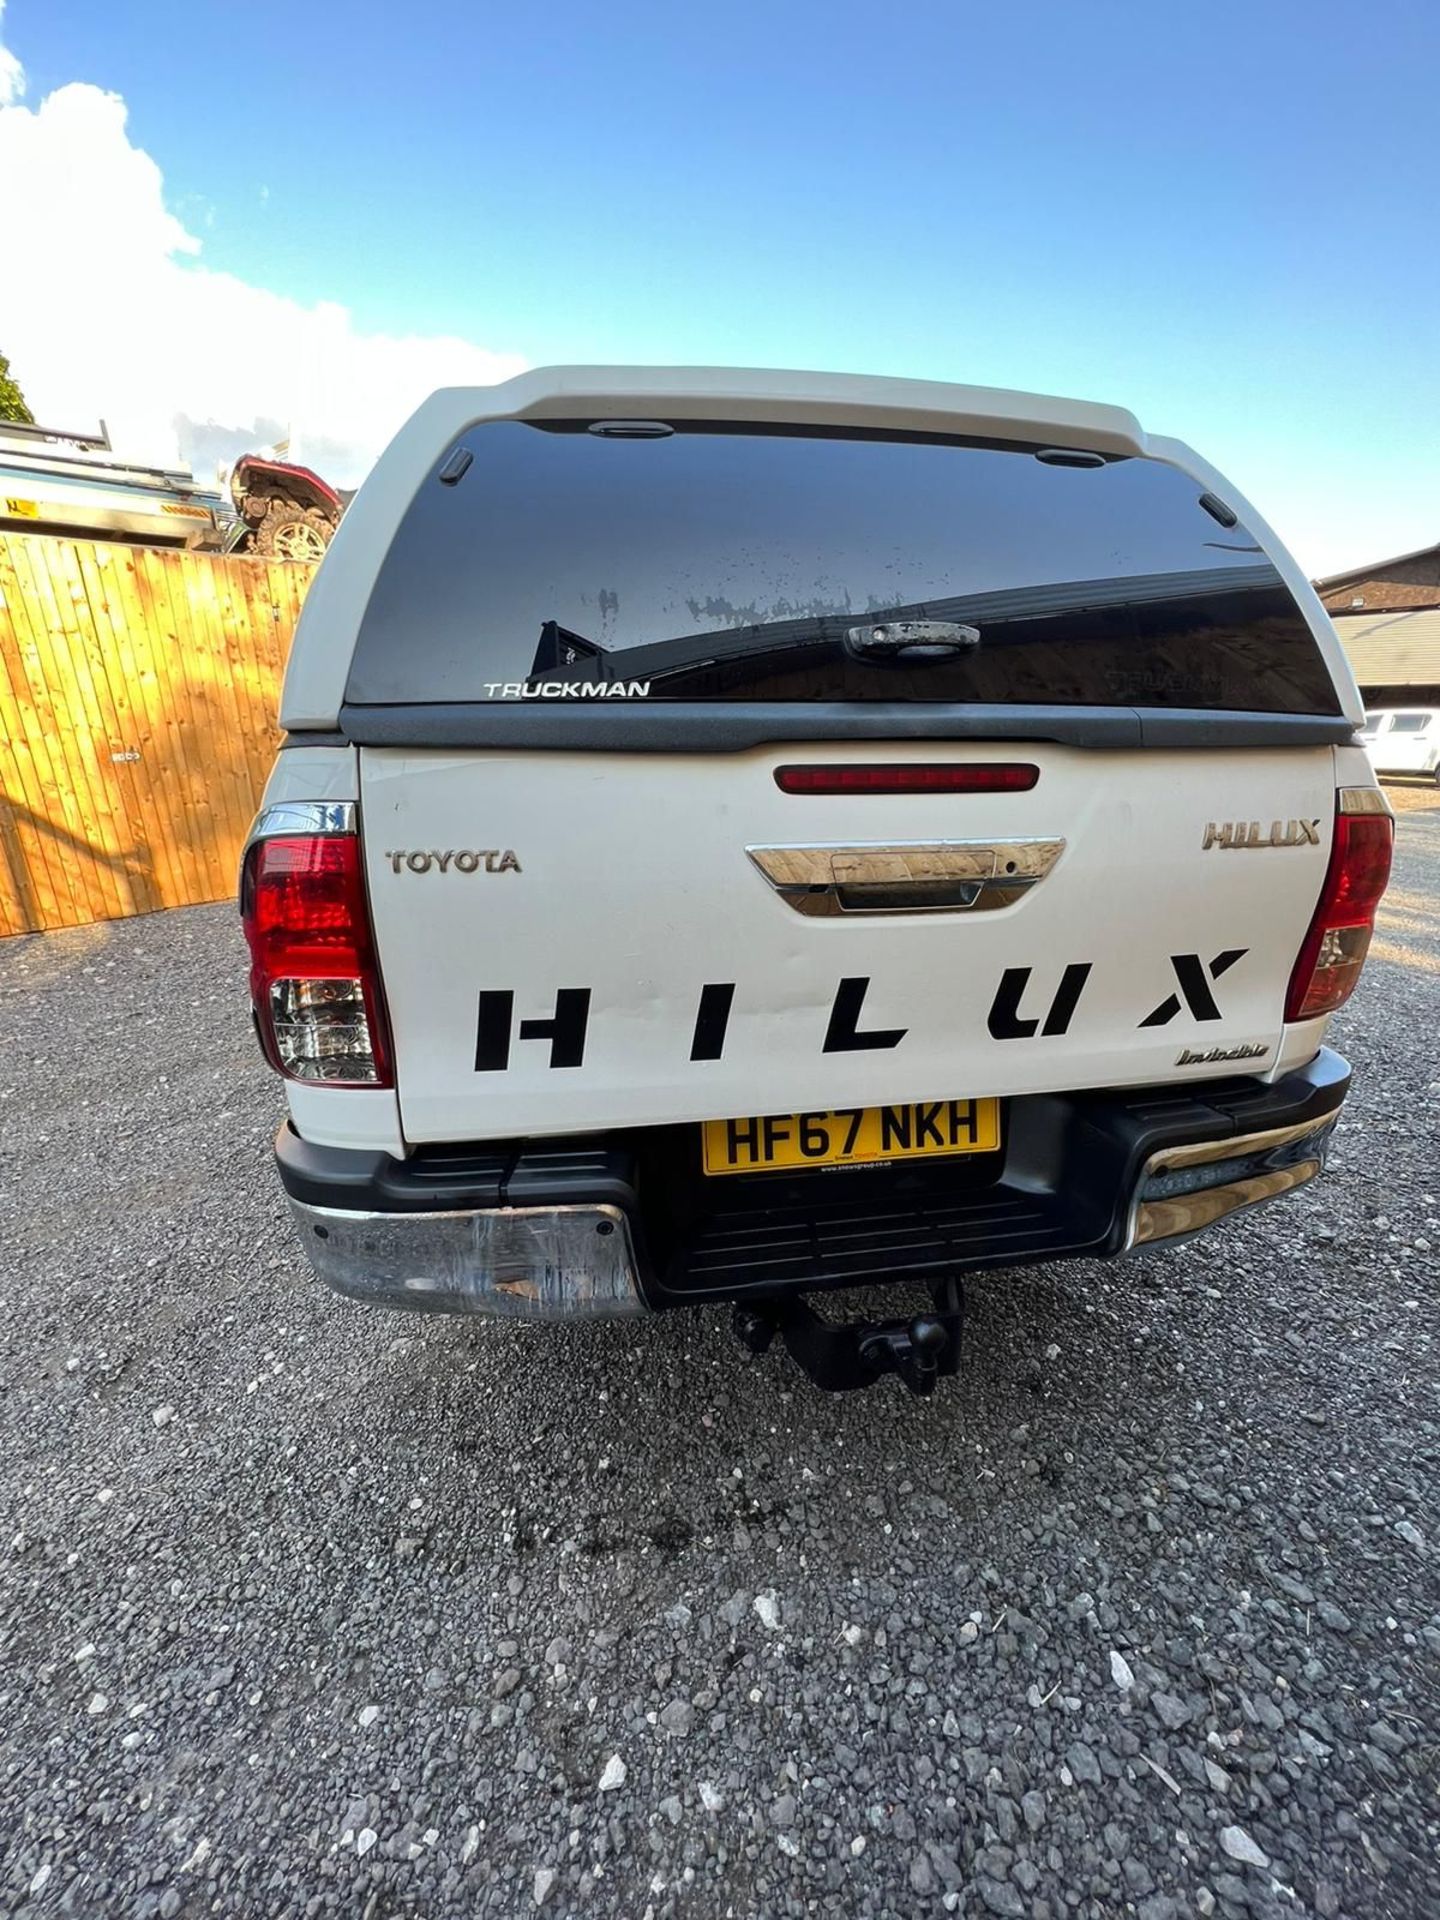 TOYOTA HILUX INVINCIBLE X DOUBLE CAB PICKUP TRUCK 67 REG - Image 3 of 14